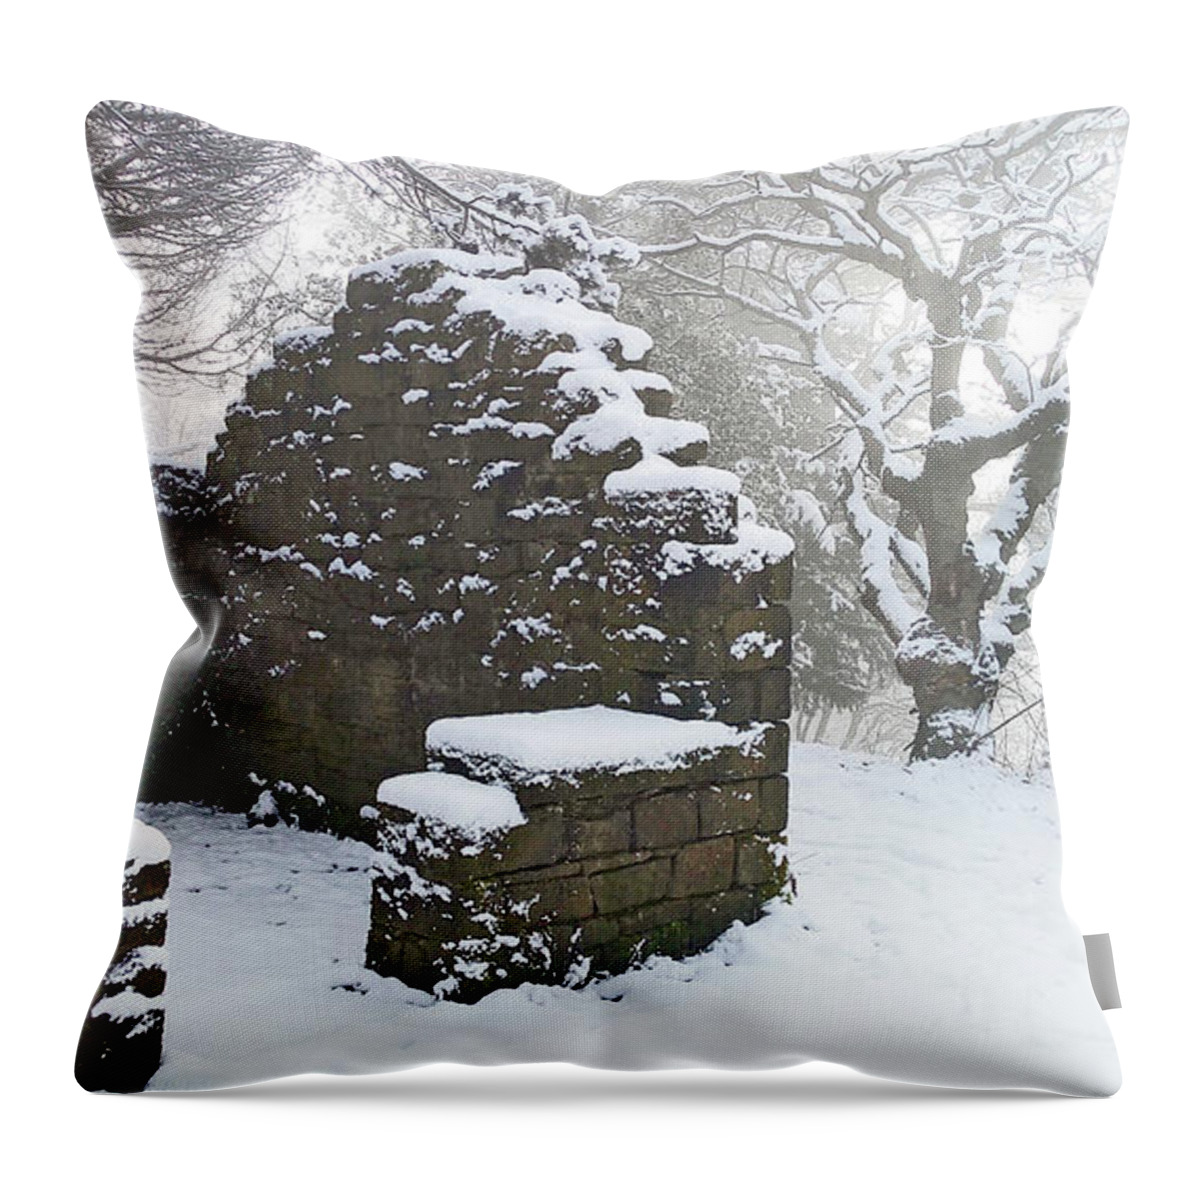 Snow Throw Pillow featuring the photograph The Ruined Bothy by Lachlan Main